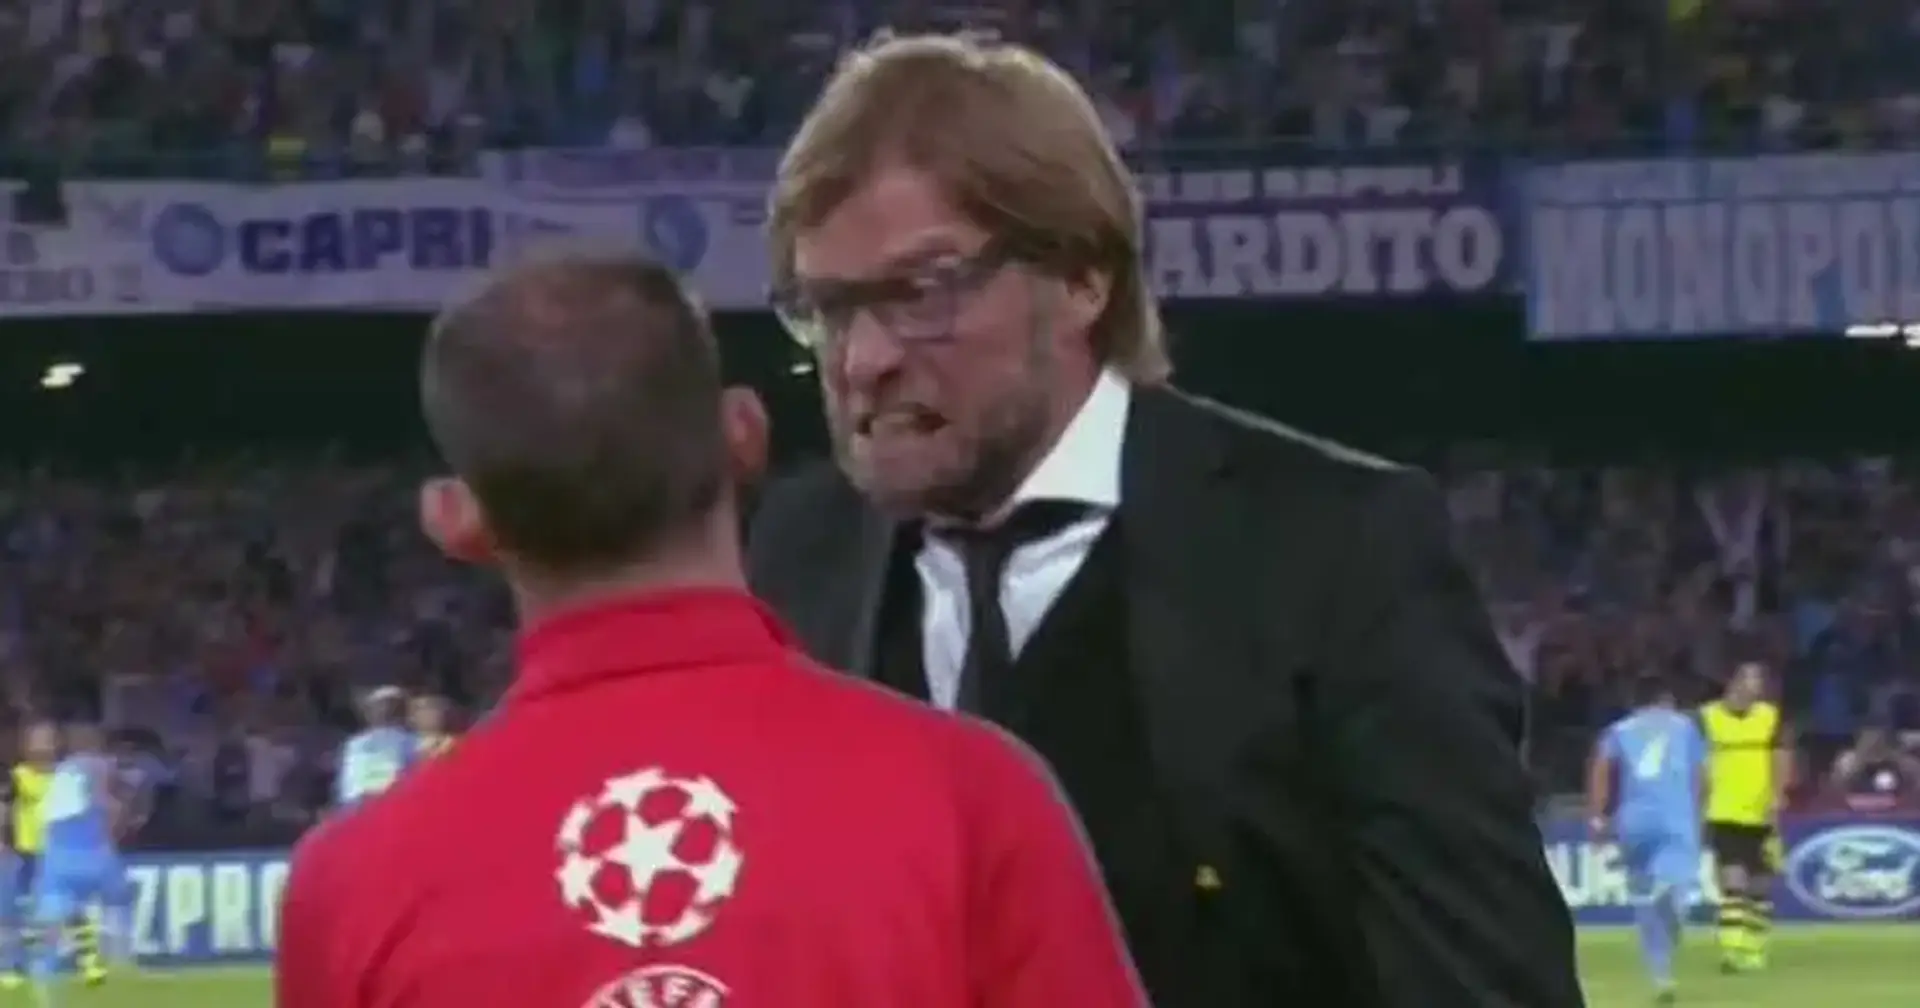 Every Liverpool fan has seen this meme but what's the origin? Story behind super angry Jurgen Klopp